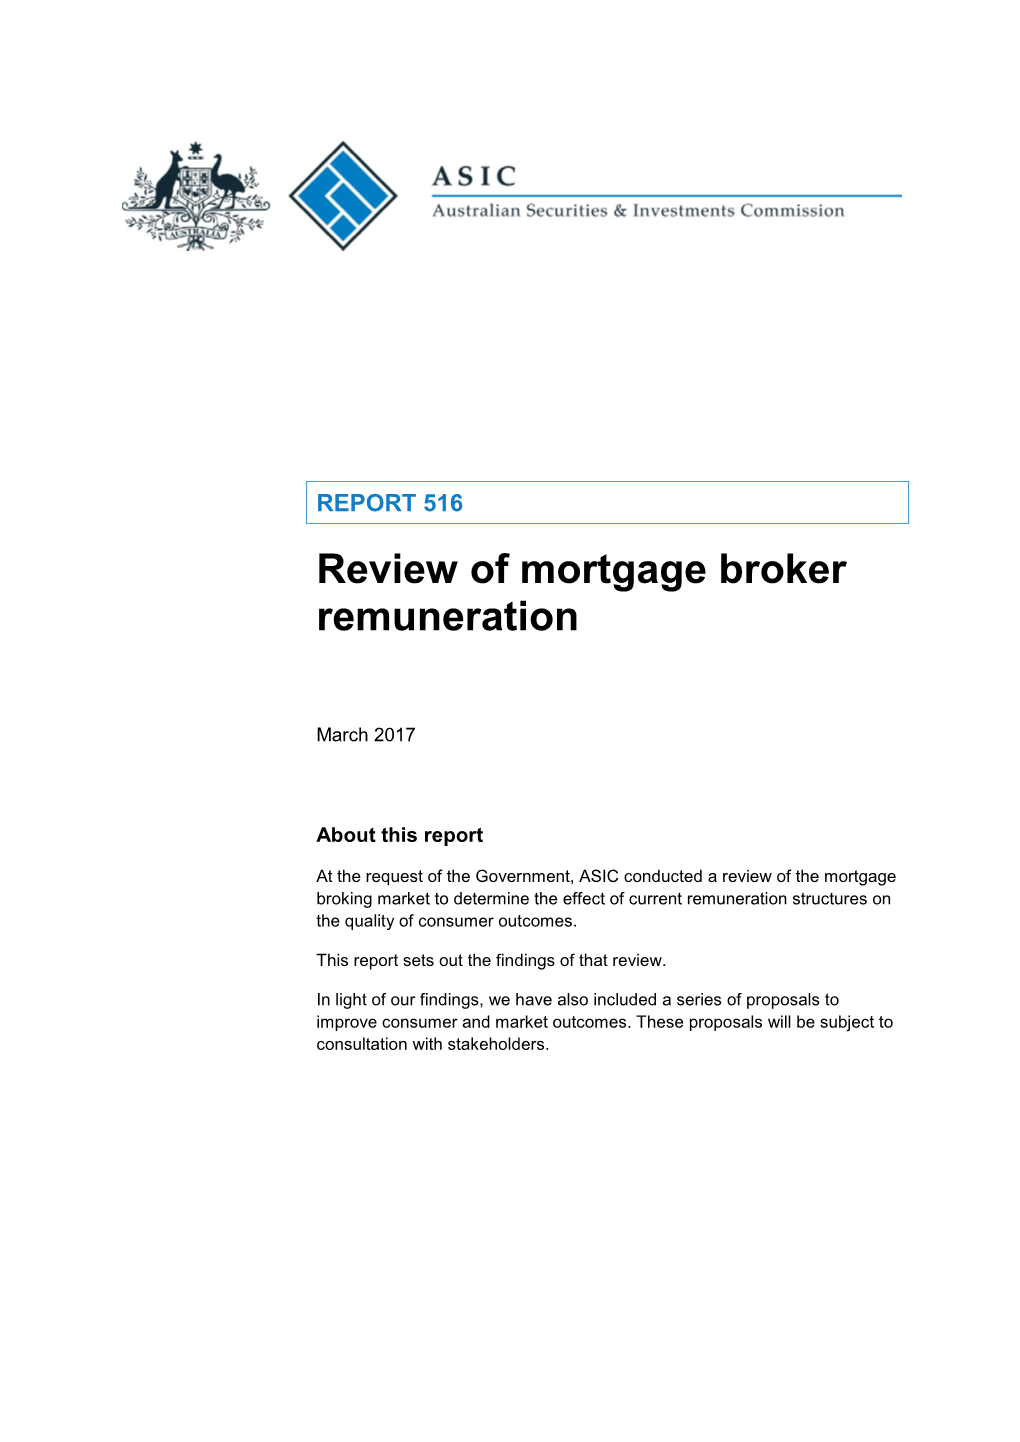 REPORT 516: Review of Mortgage Broker Remuneration